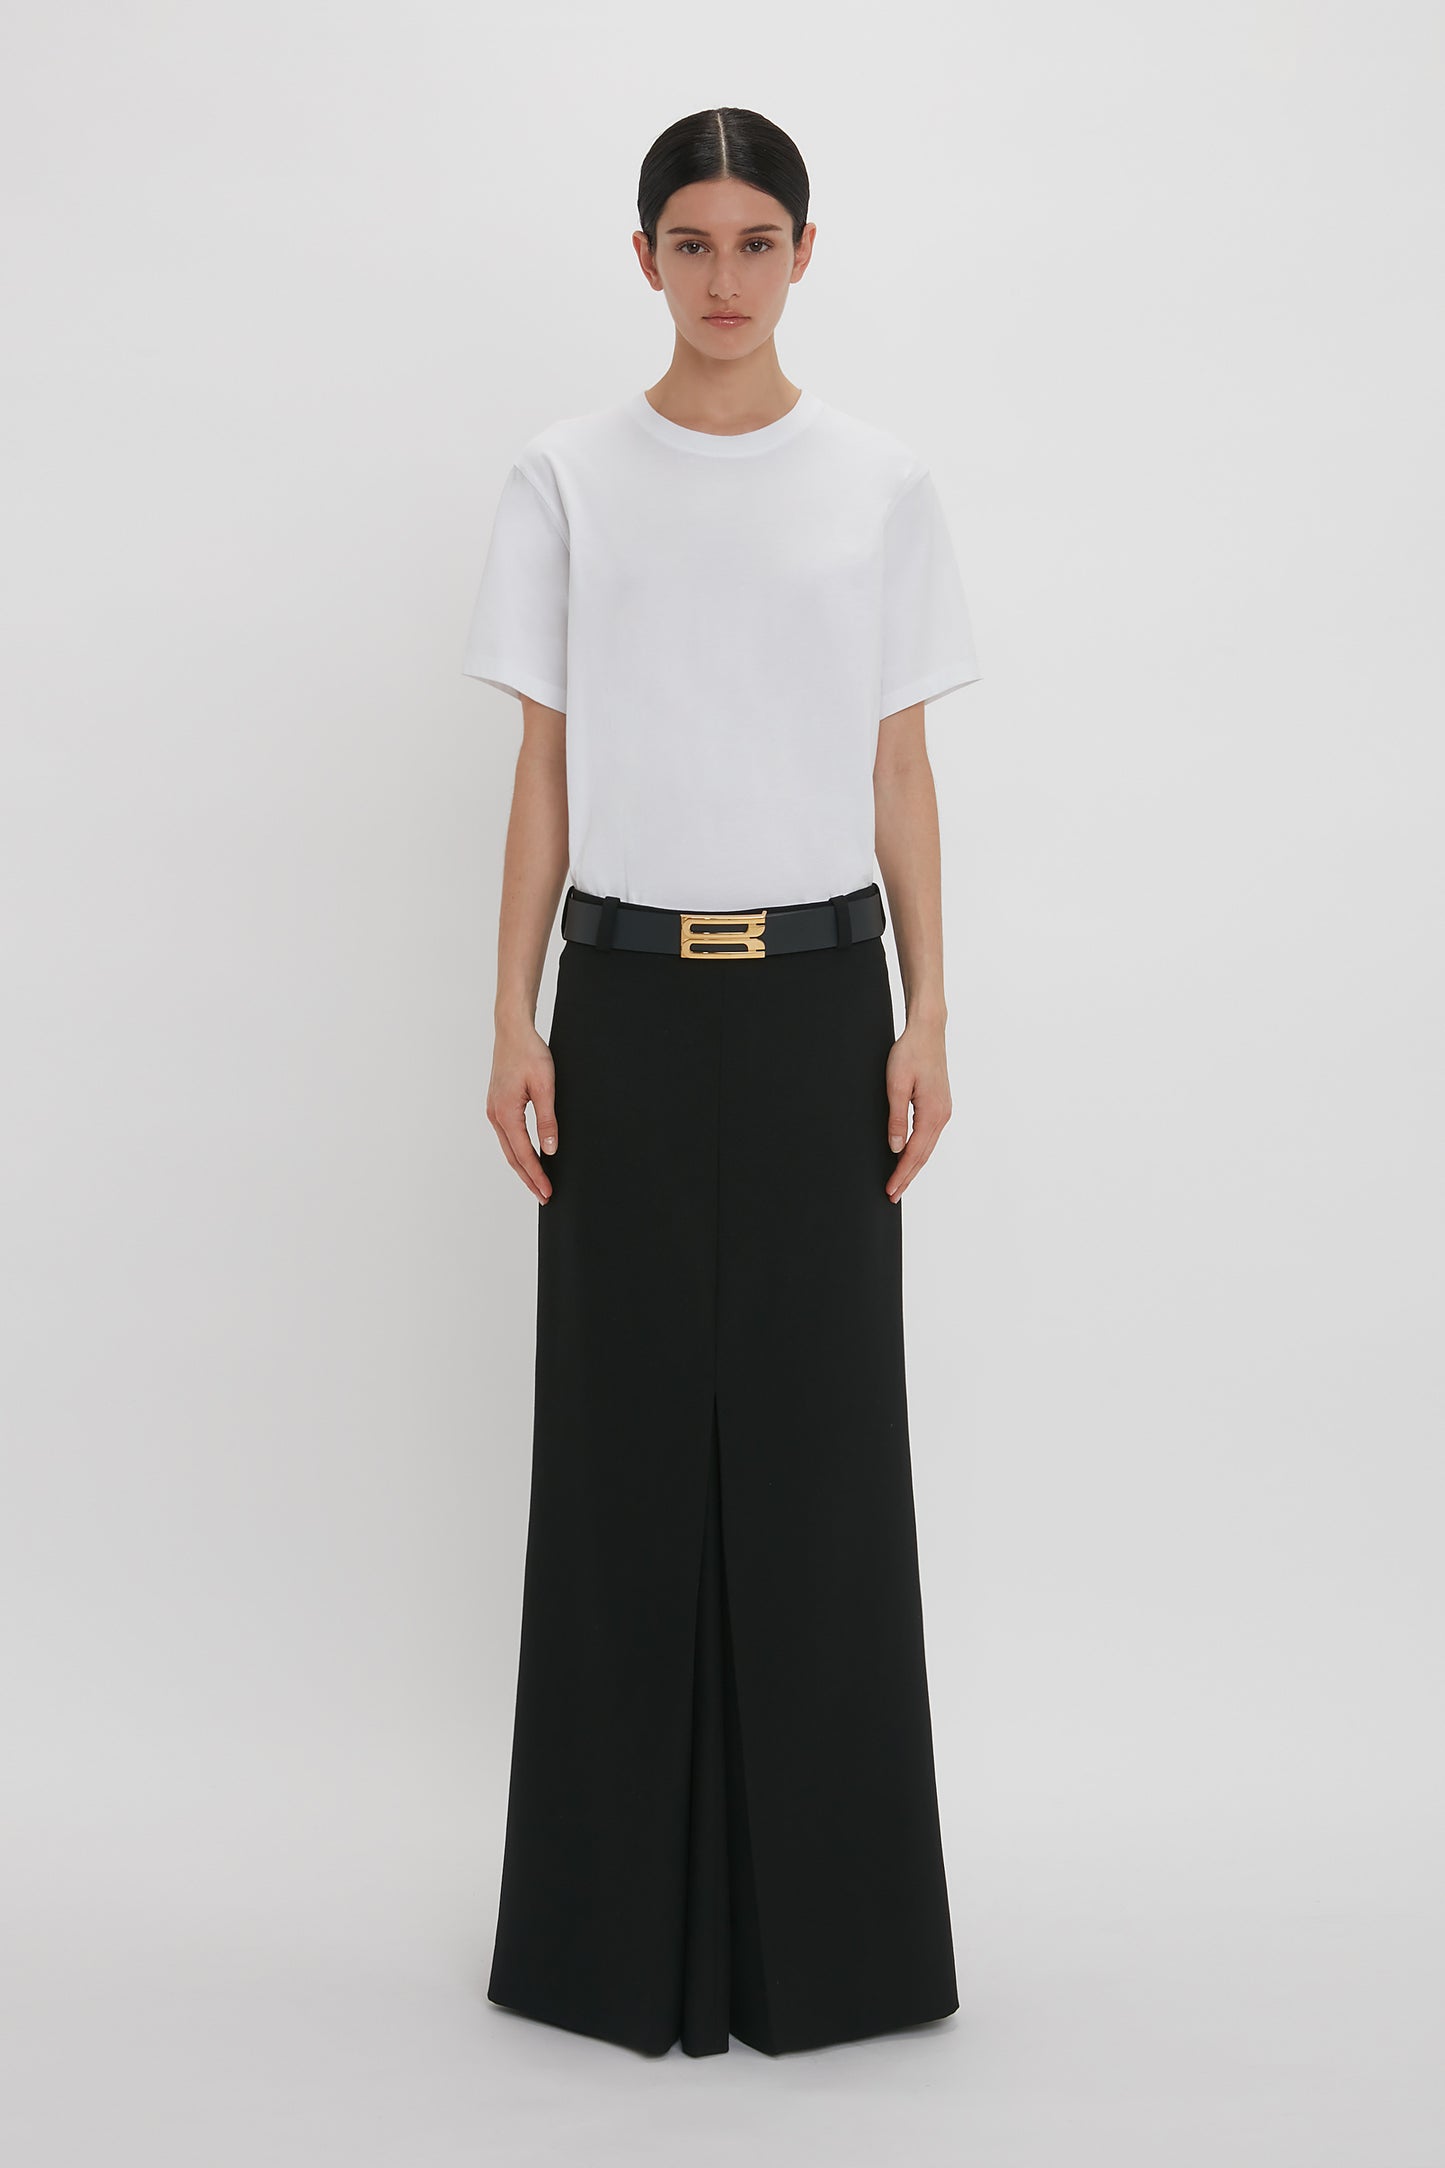 A woman standing in a white studio, wearing a Victoria Beckham Floor-Length Box Pleat Skirt in Black and high-waisted black trousers with a broad belt with gold buckle.